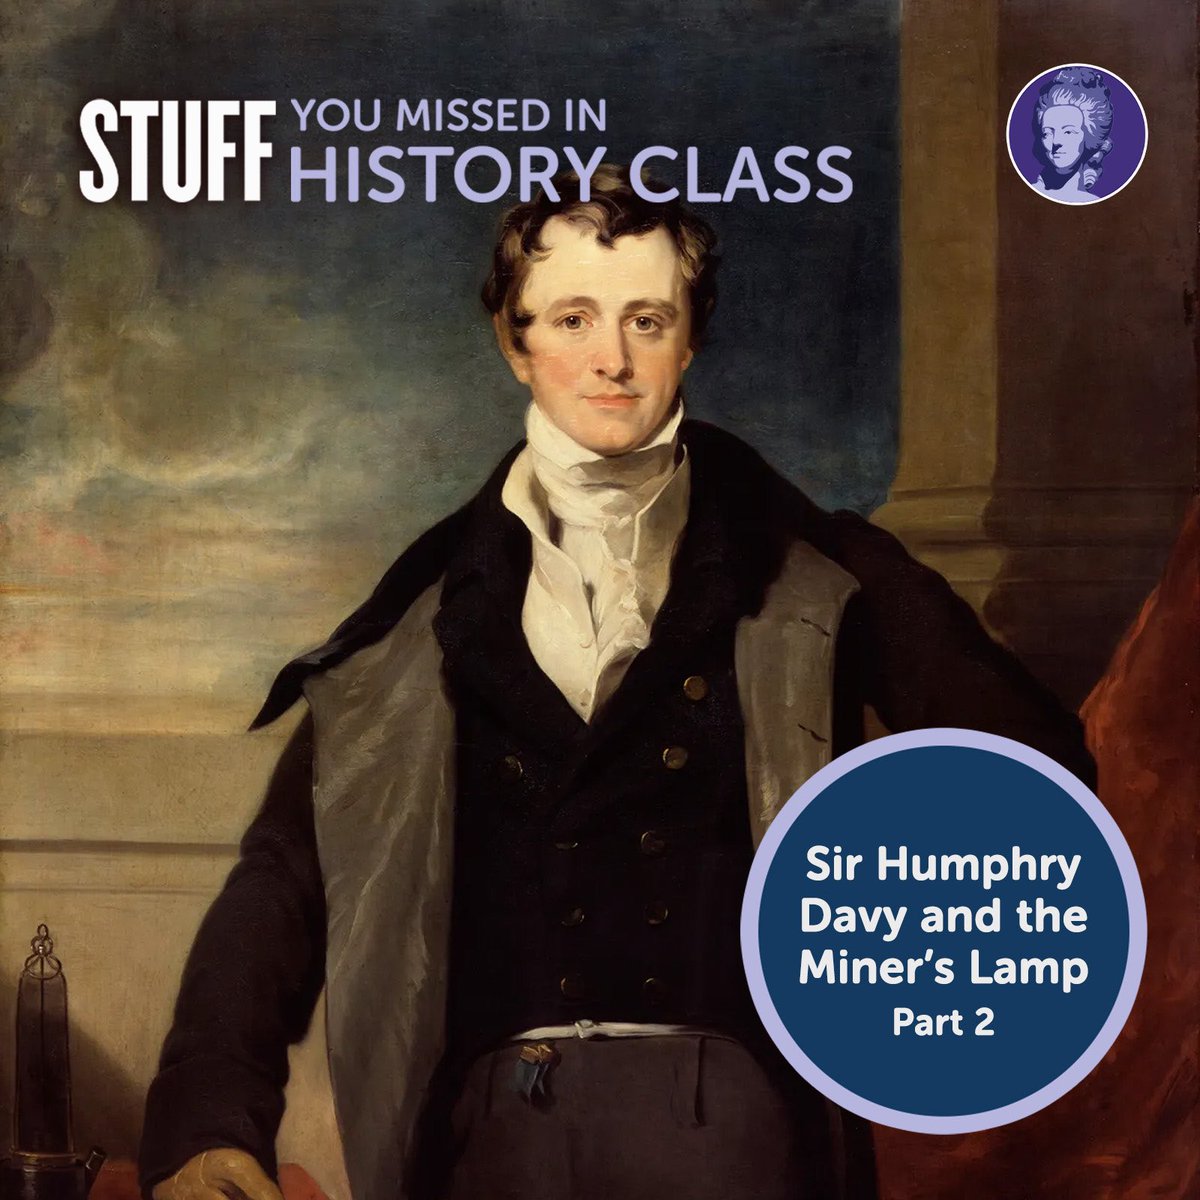 Davy's career after his work in nitrous oxide included the invention of a miner's lamp designed to make mining safer. This invention came with a bit of controversy.

Listen here: omny.fm/shows/stuff-yo…